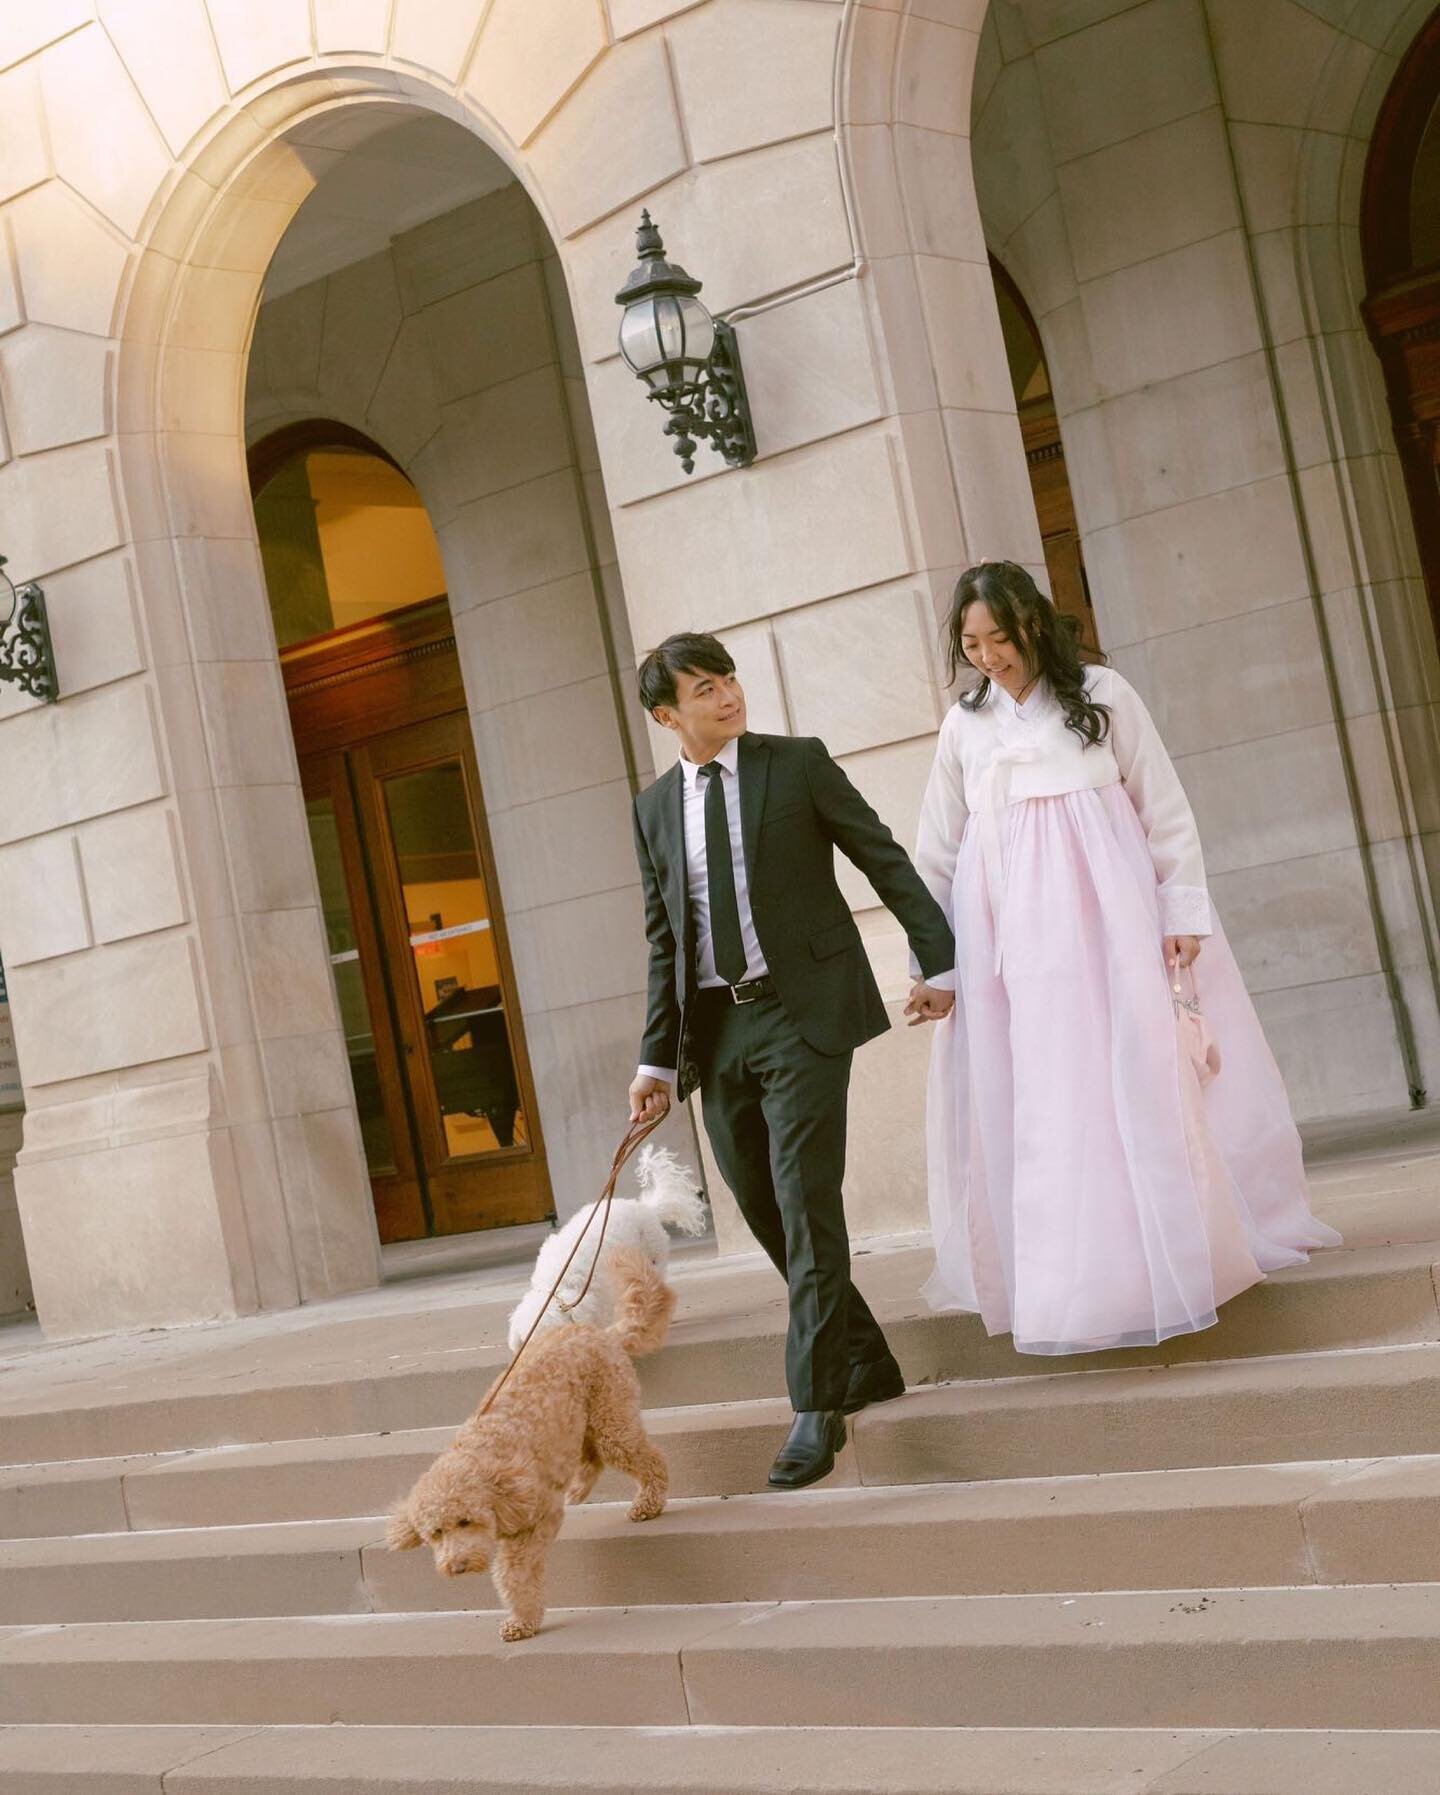 Esther &amp; Daniel giving Crazy Rich Asian vibes 💸🤍
scroll to see Miso + Teddy&rsquo;s POV

YES to more dogs during shoots and heck YES to wearing our traditional outfits!! 📢  We are on our knees begging!!